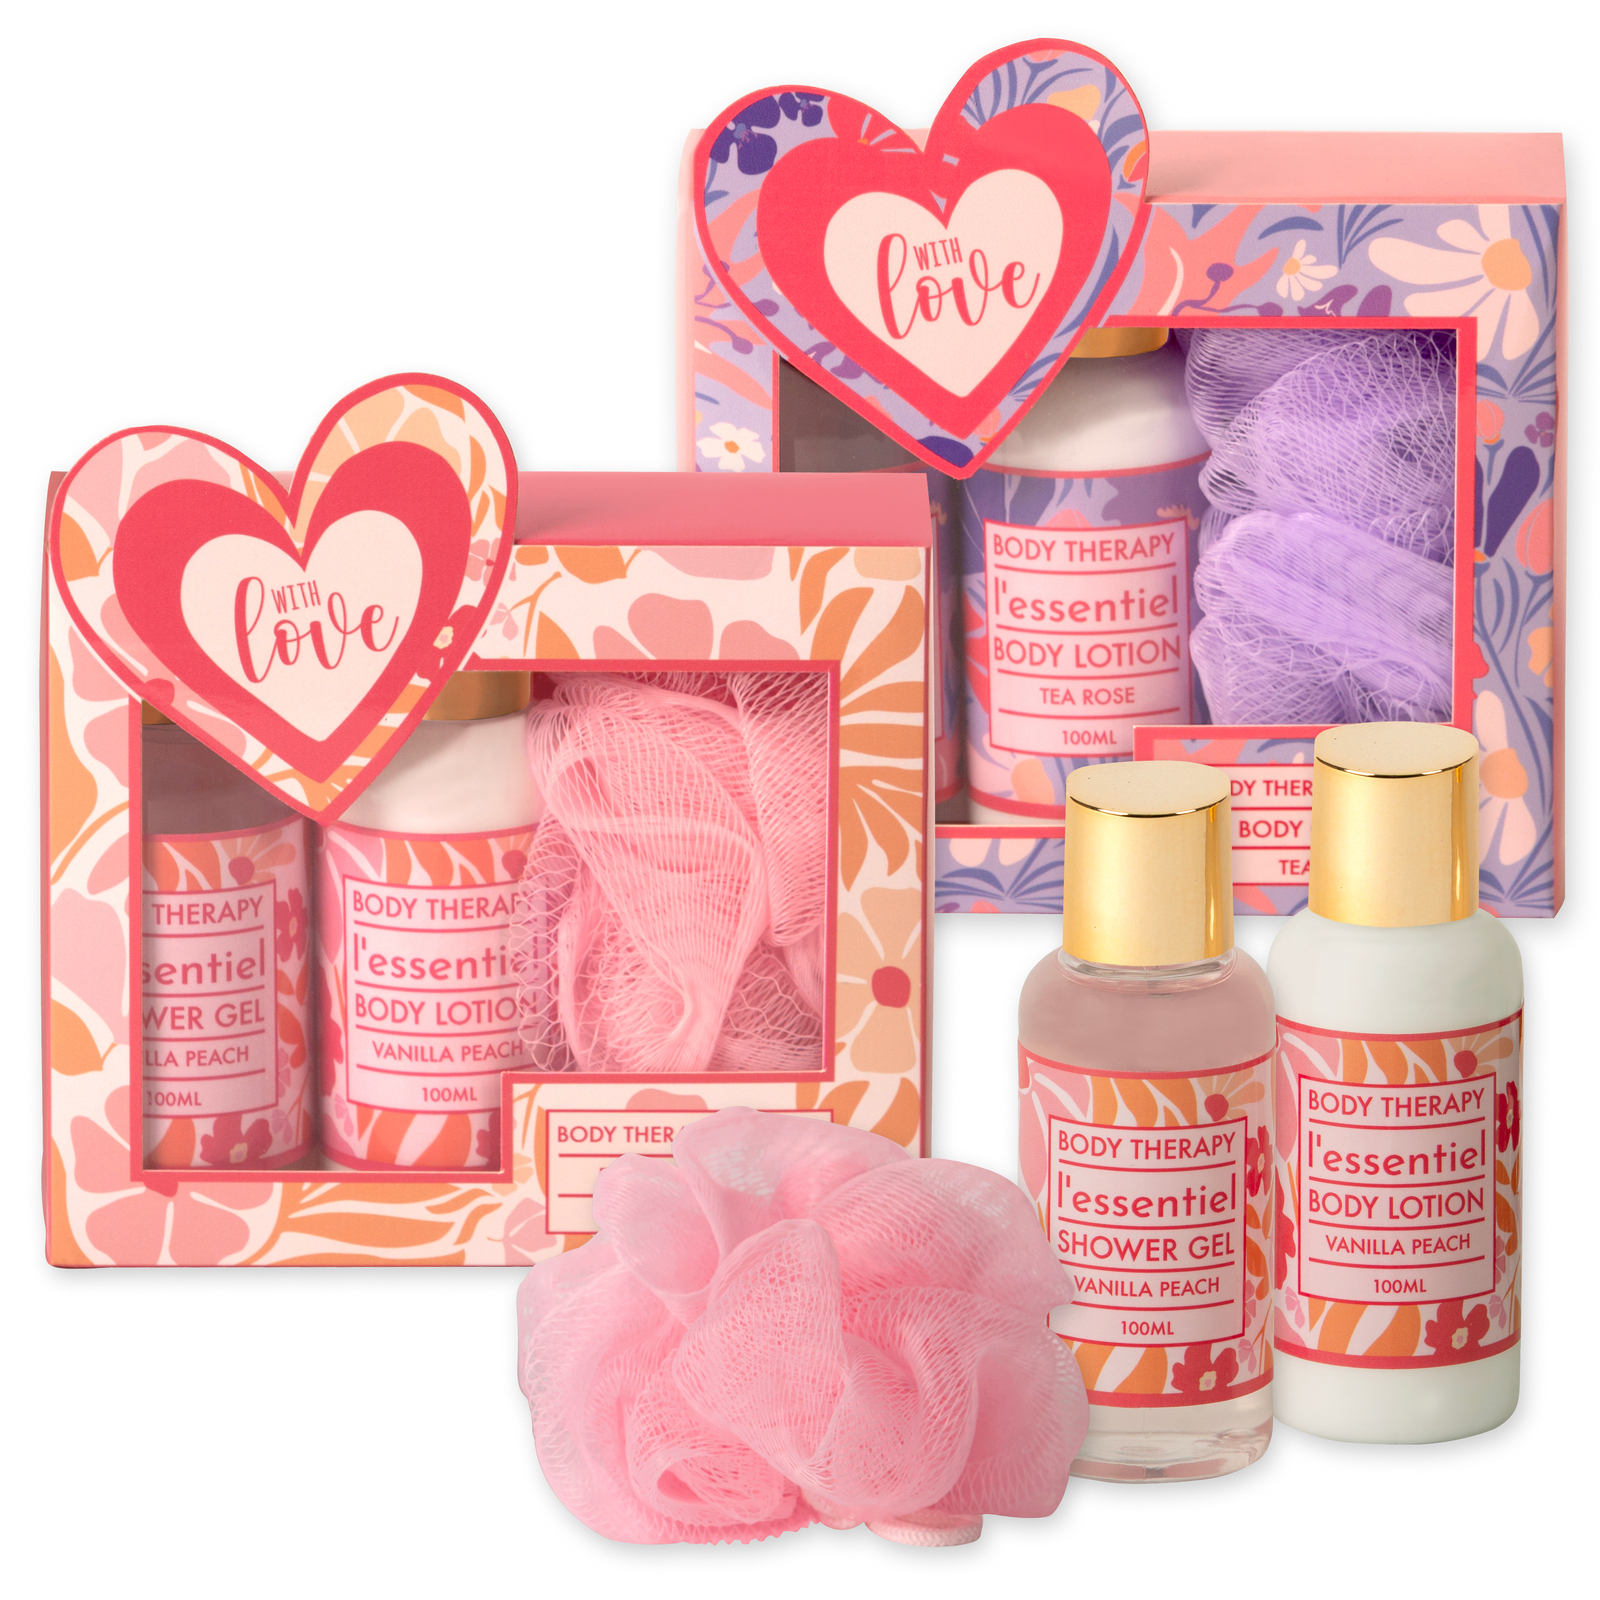 Body Care Set - Pack of 6 ($8.50 ea)